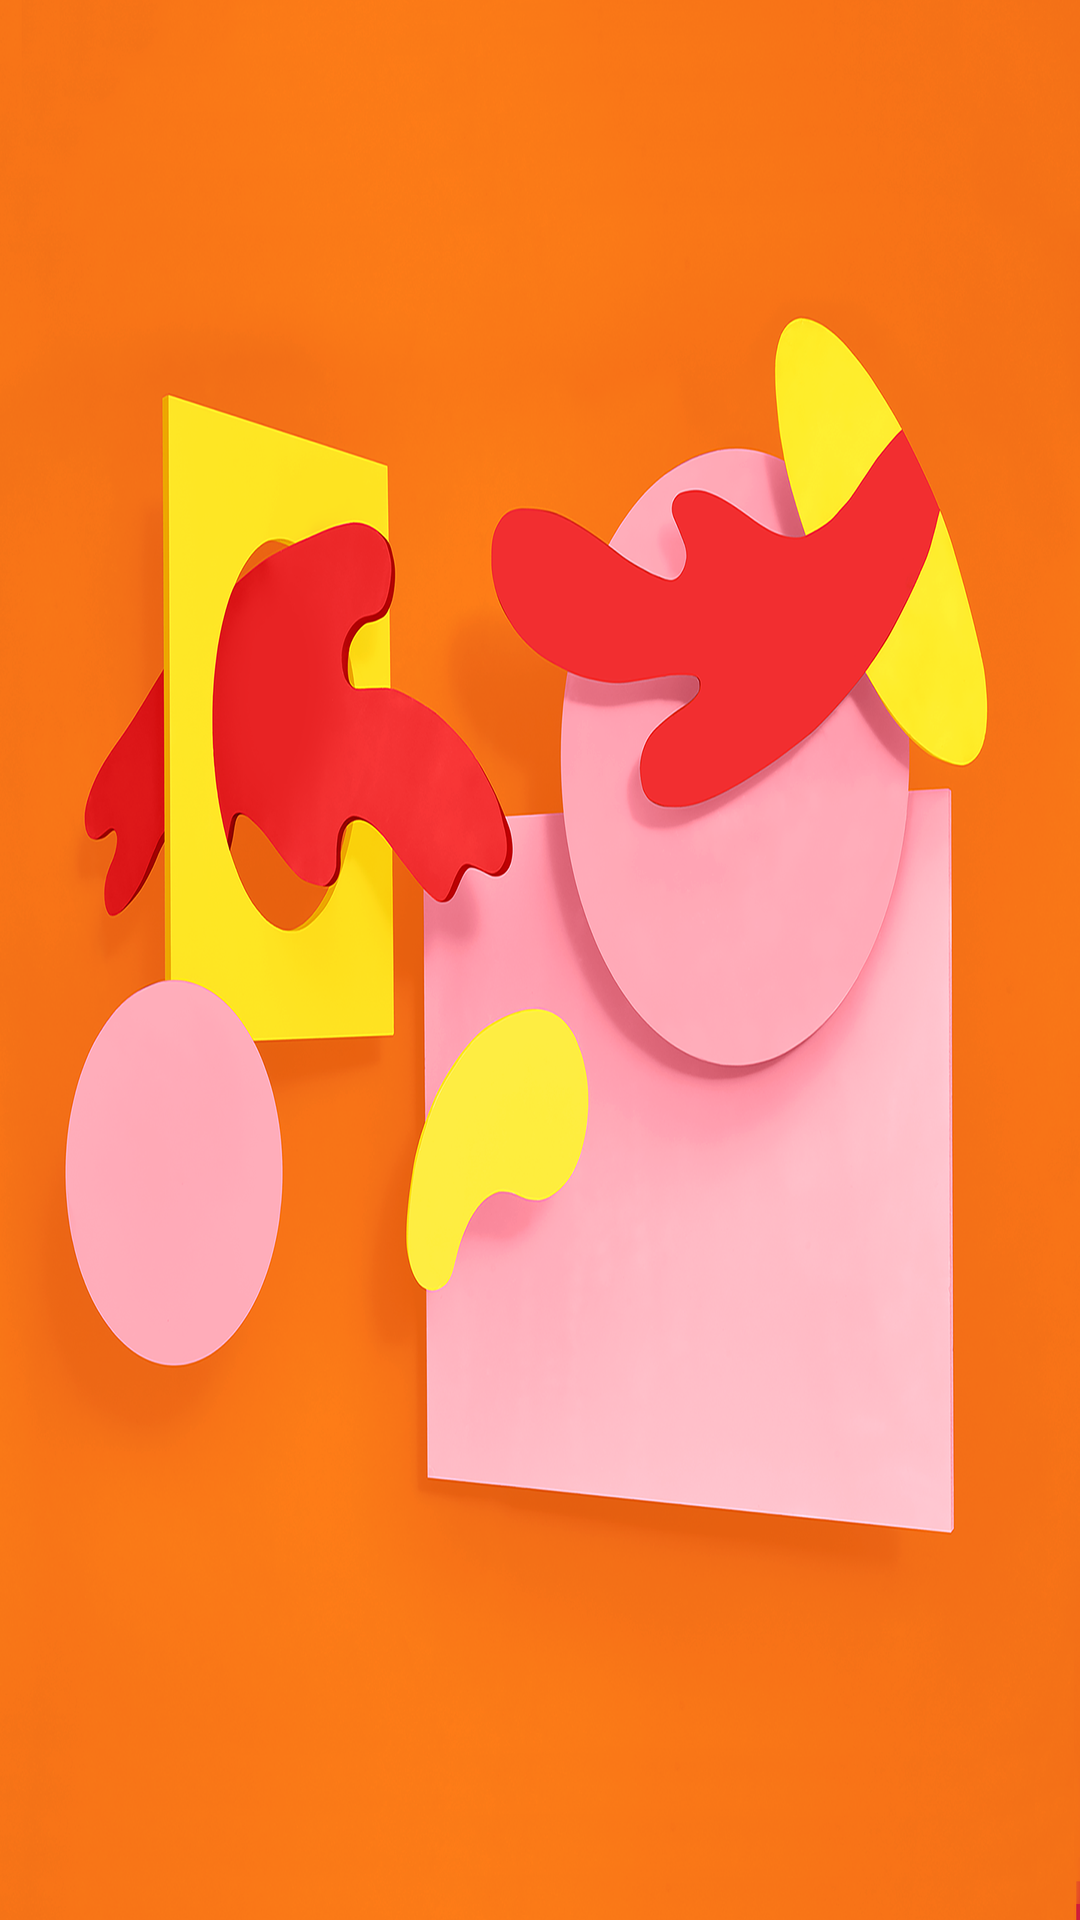 official android wallpapers,pink,yellow,orange,construction paper,illustration